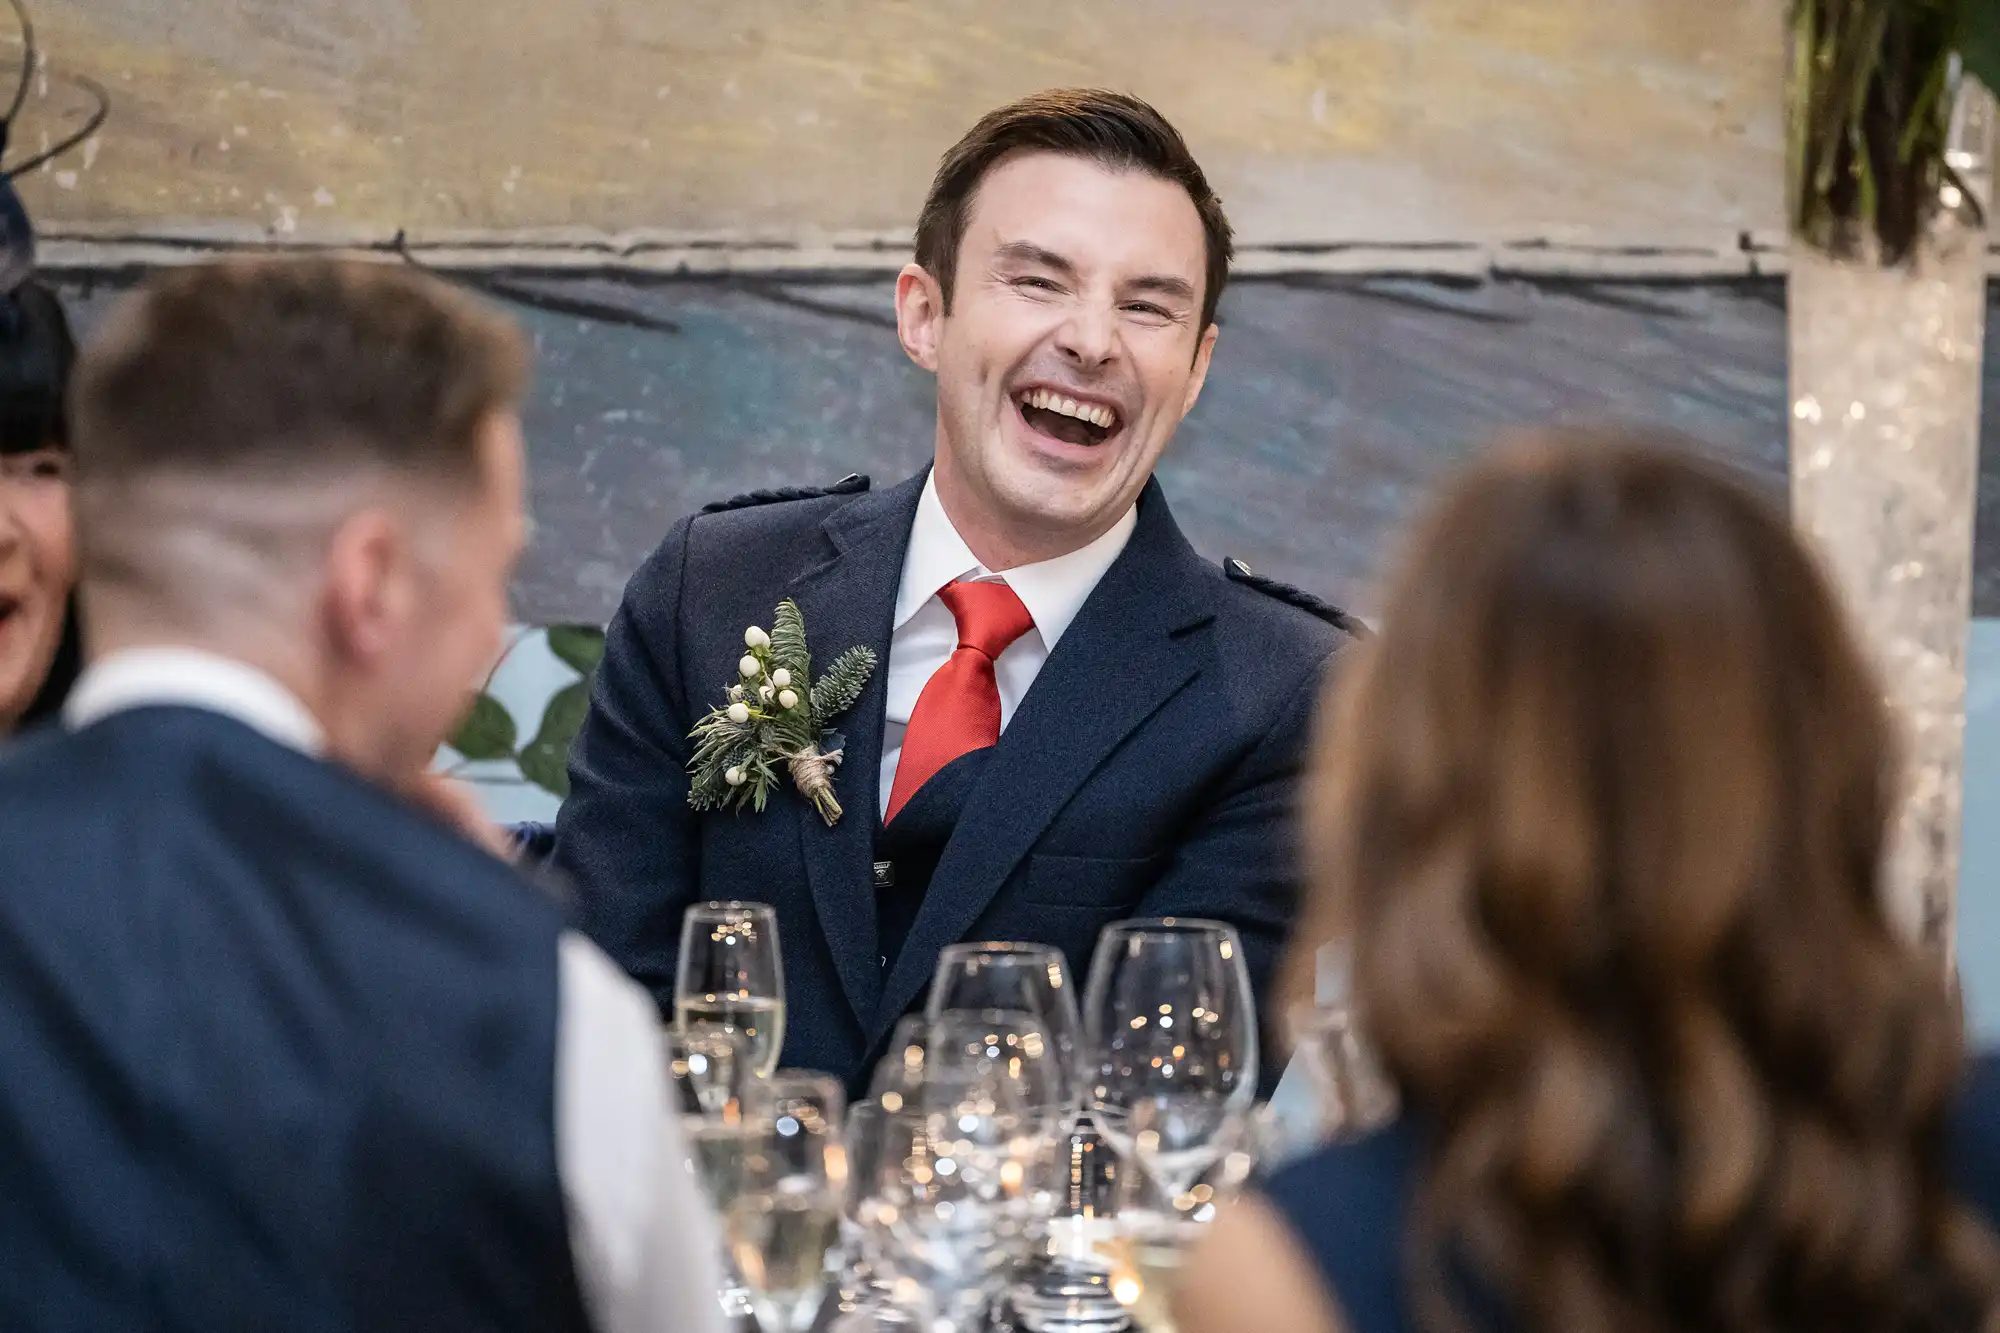 A man in a suit and red tie is laughing while sitting at a table with several people and drinking glasses in front of him.